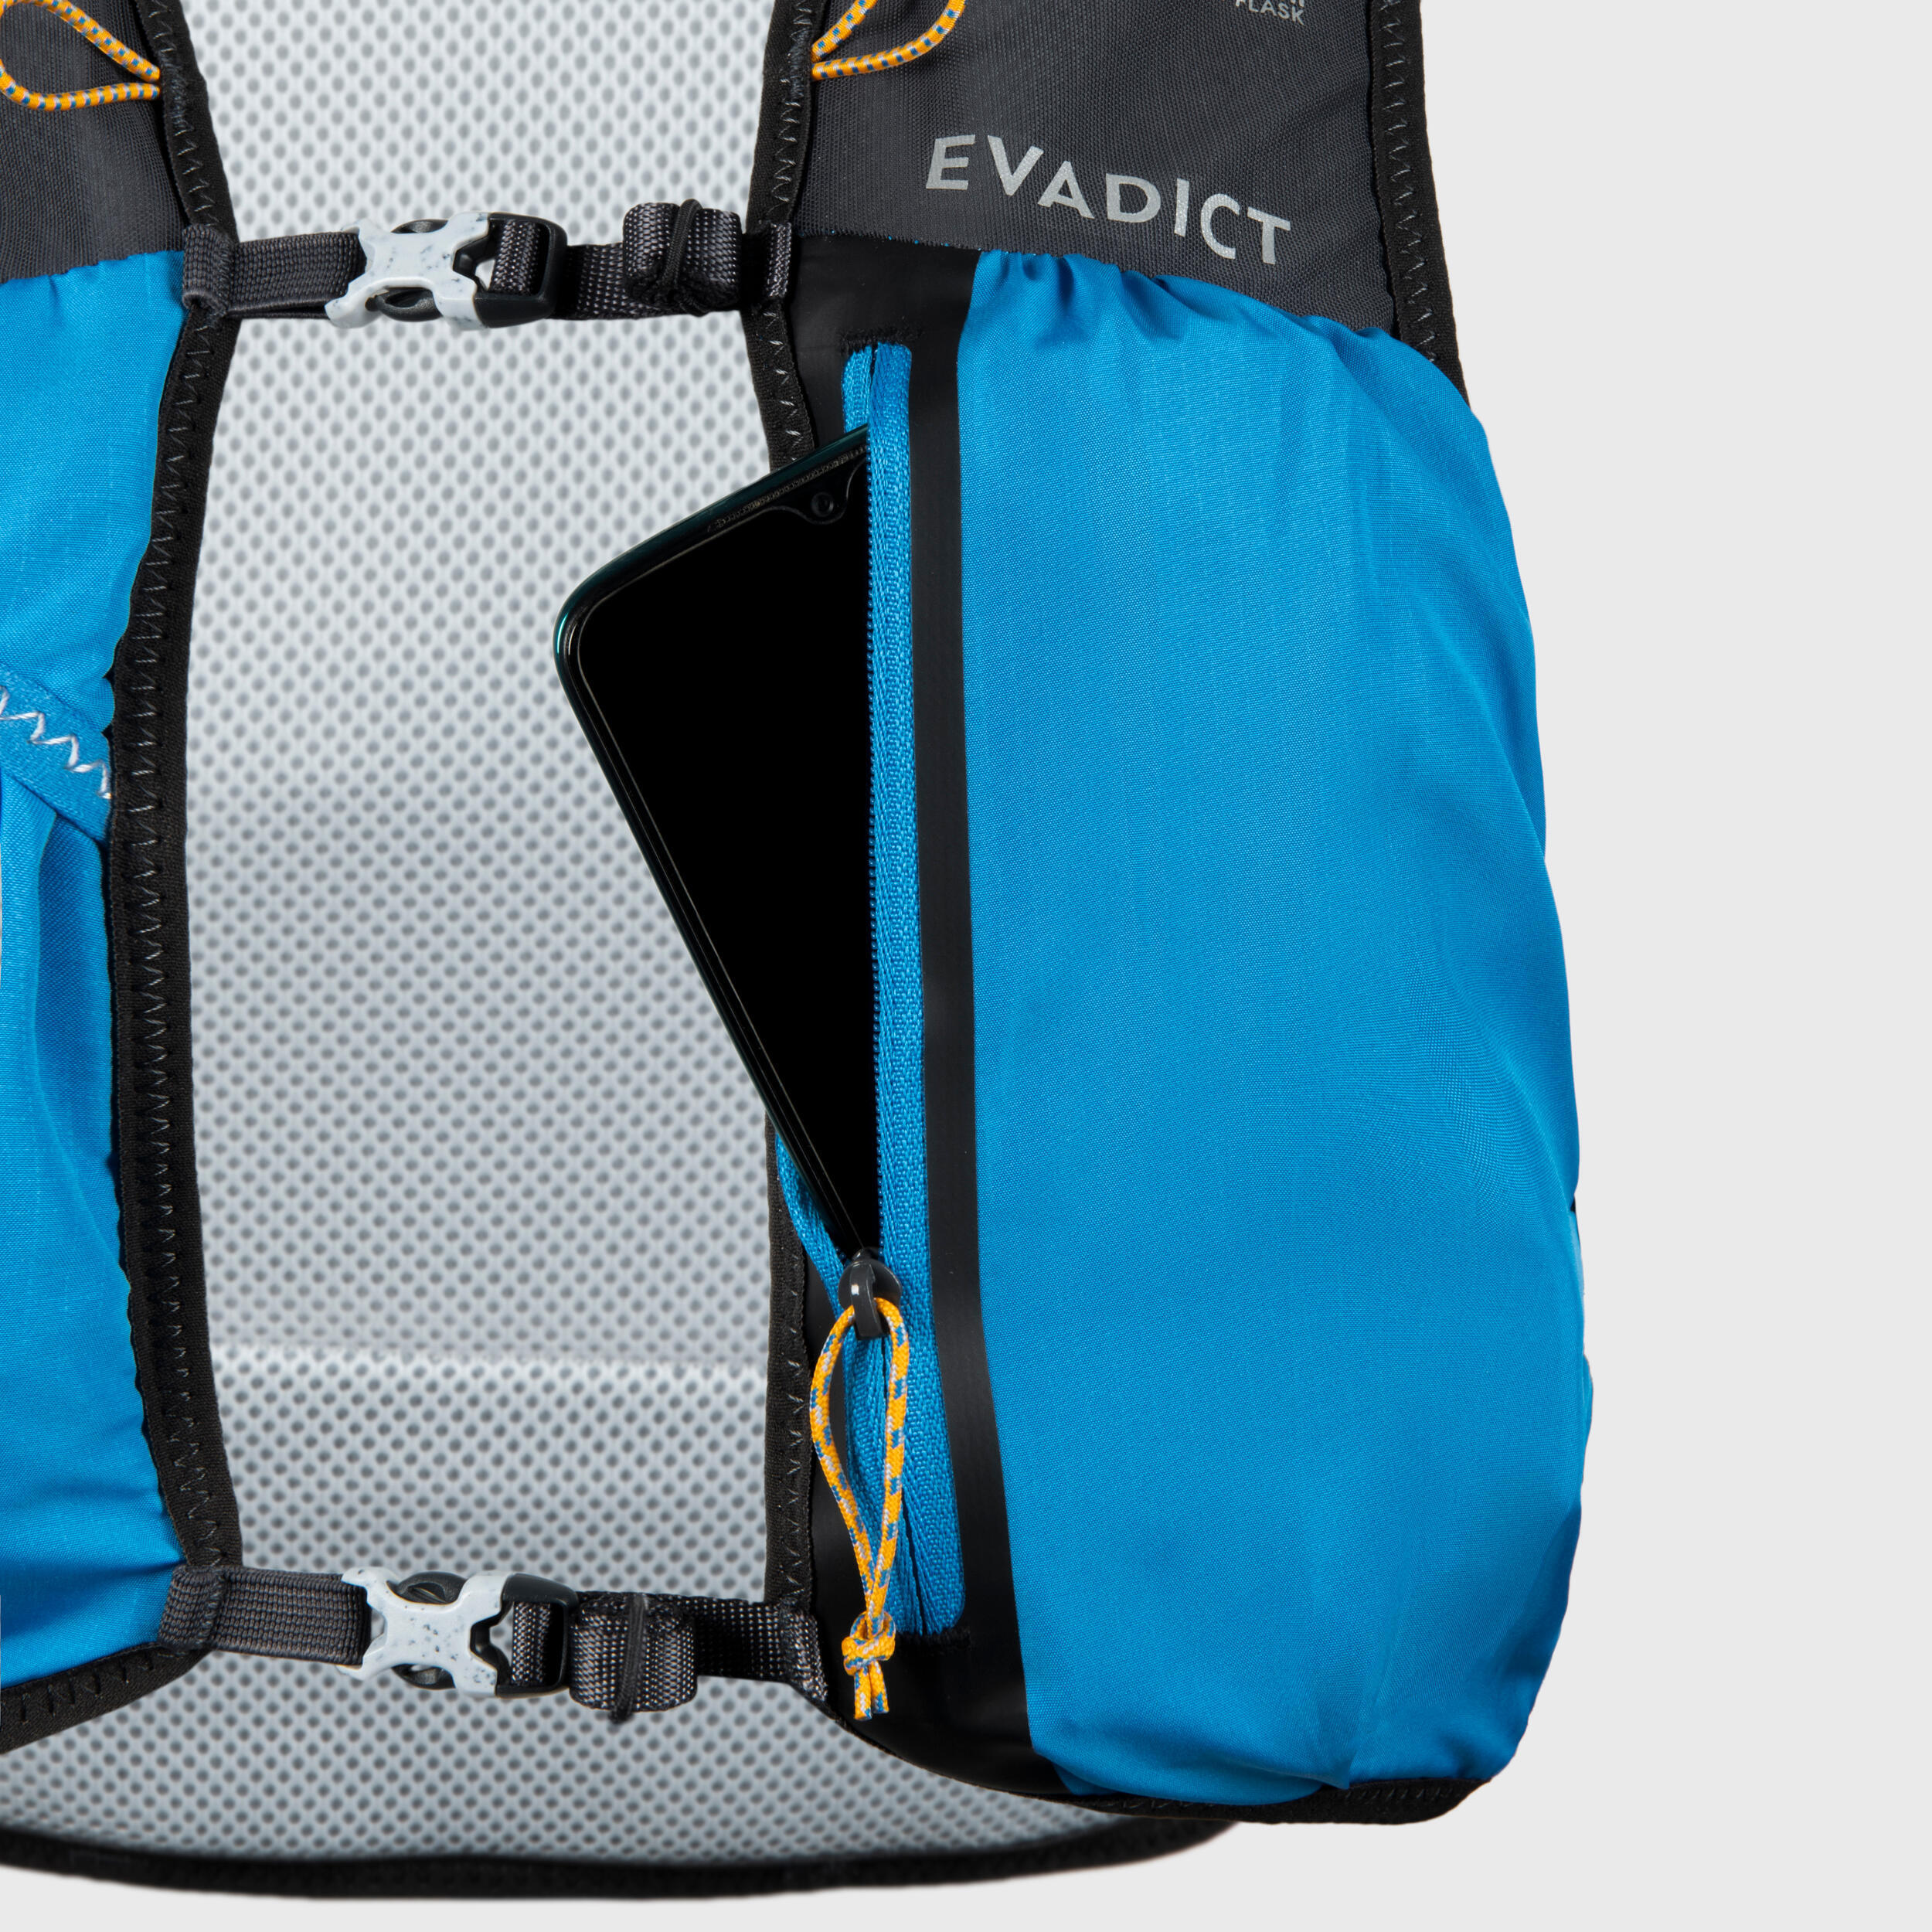 5L TRAIL RUNNING BAG - BLUE - SOLD WITH 1L WATER BLADDER 6/12